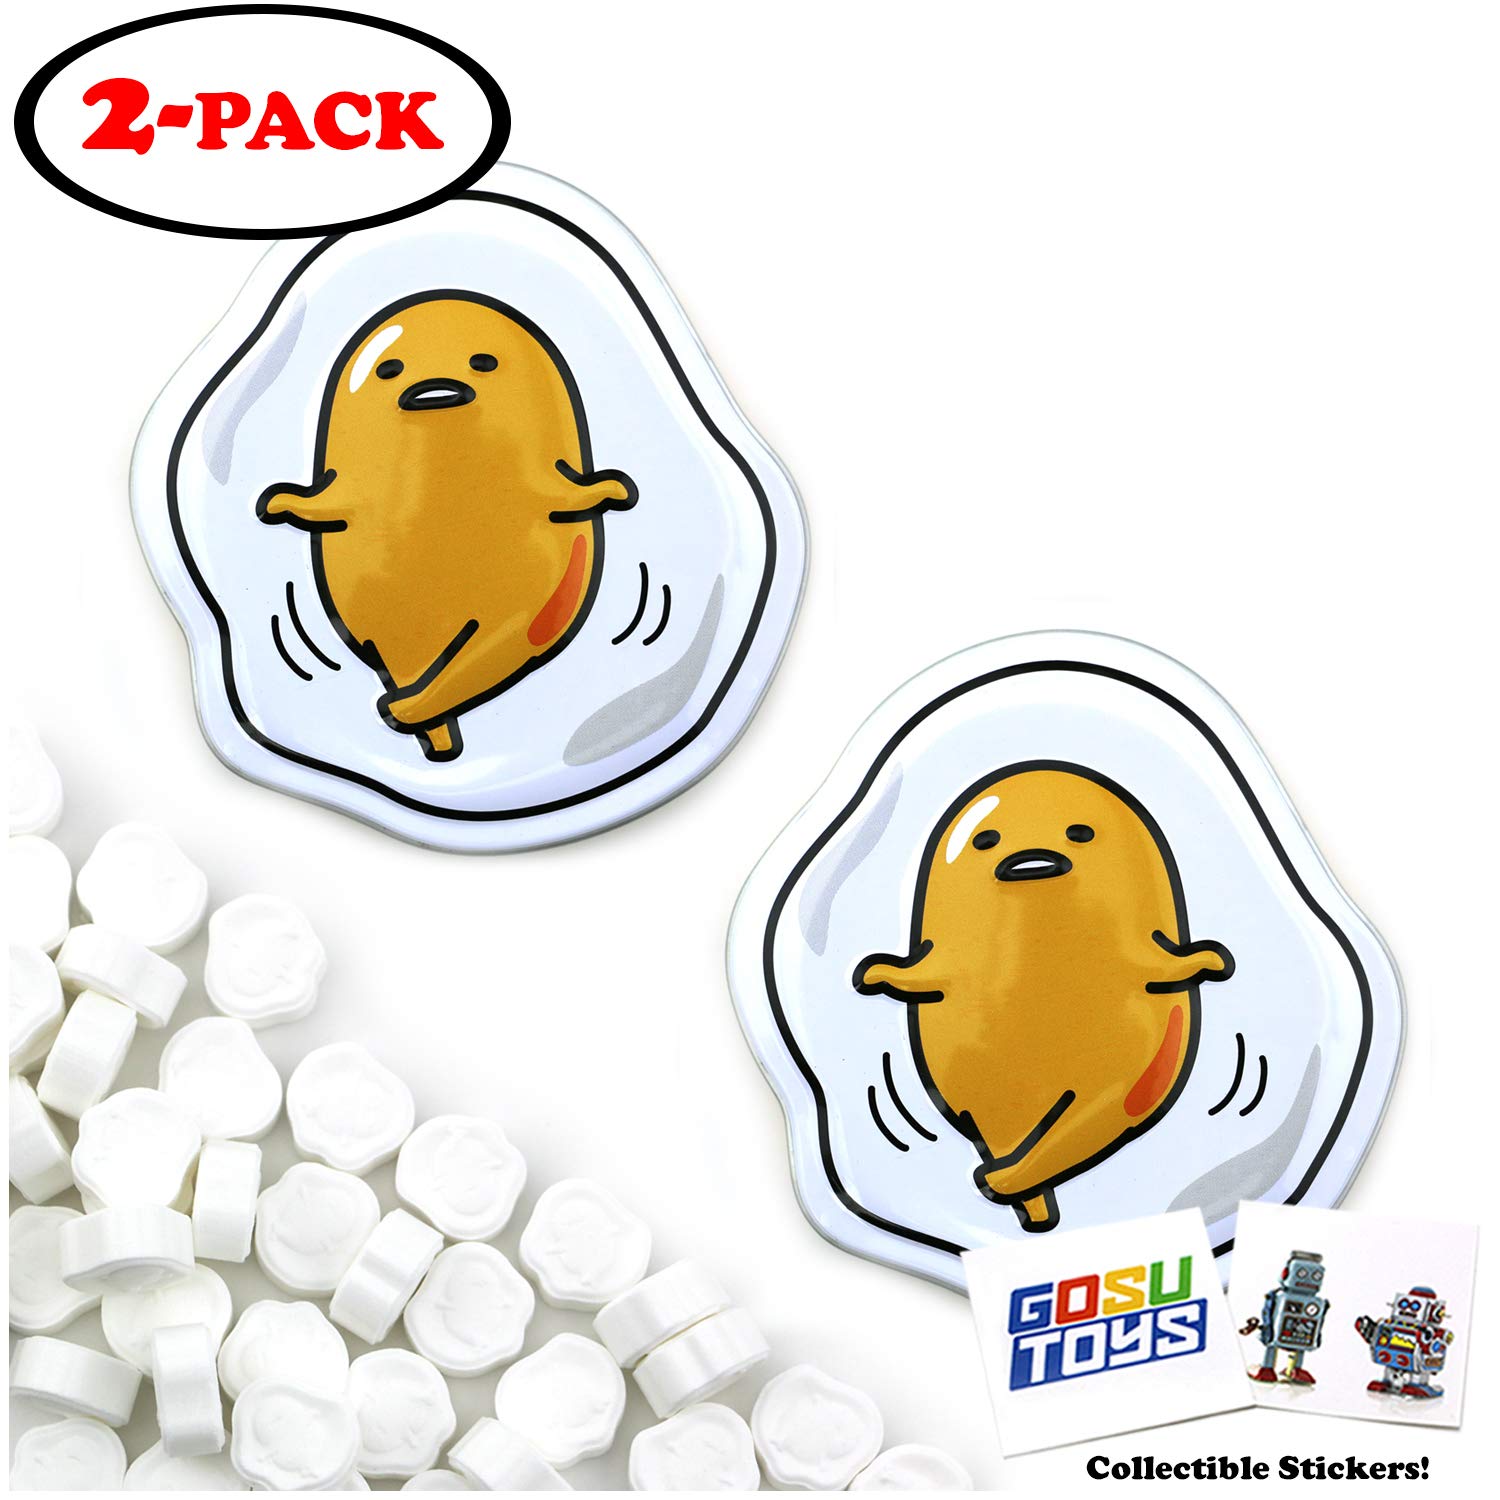 Gudetama The Lazy Egg Tin Candy (2 Pack) Sweet Vanilla Flavor Gift Stuffer with 2 GosuToys Stickers